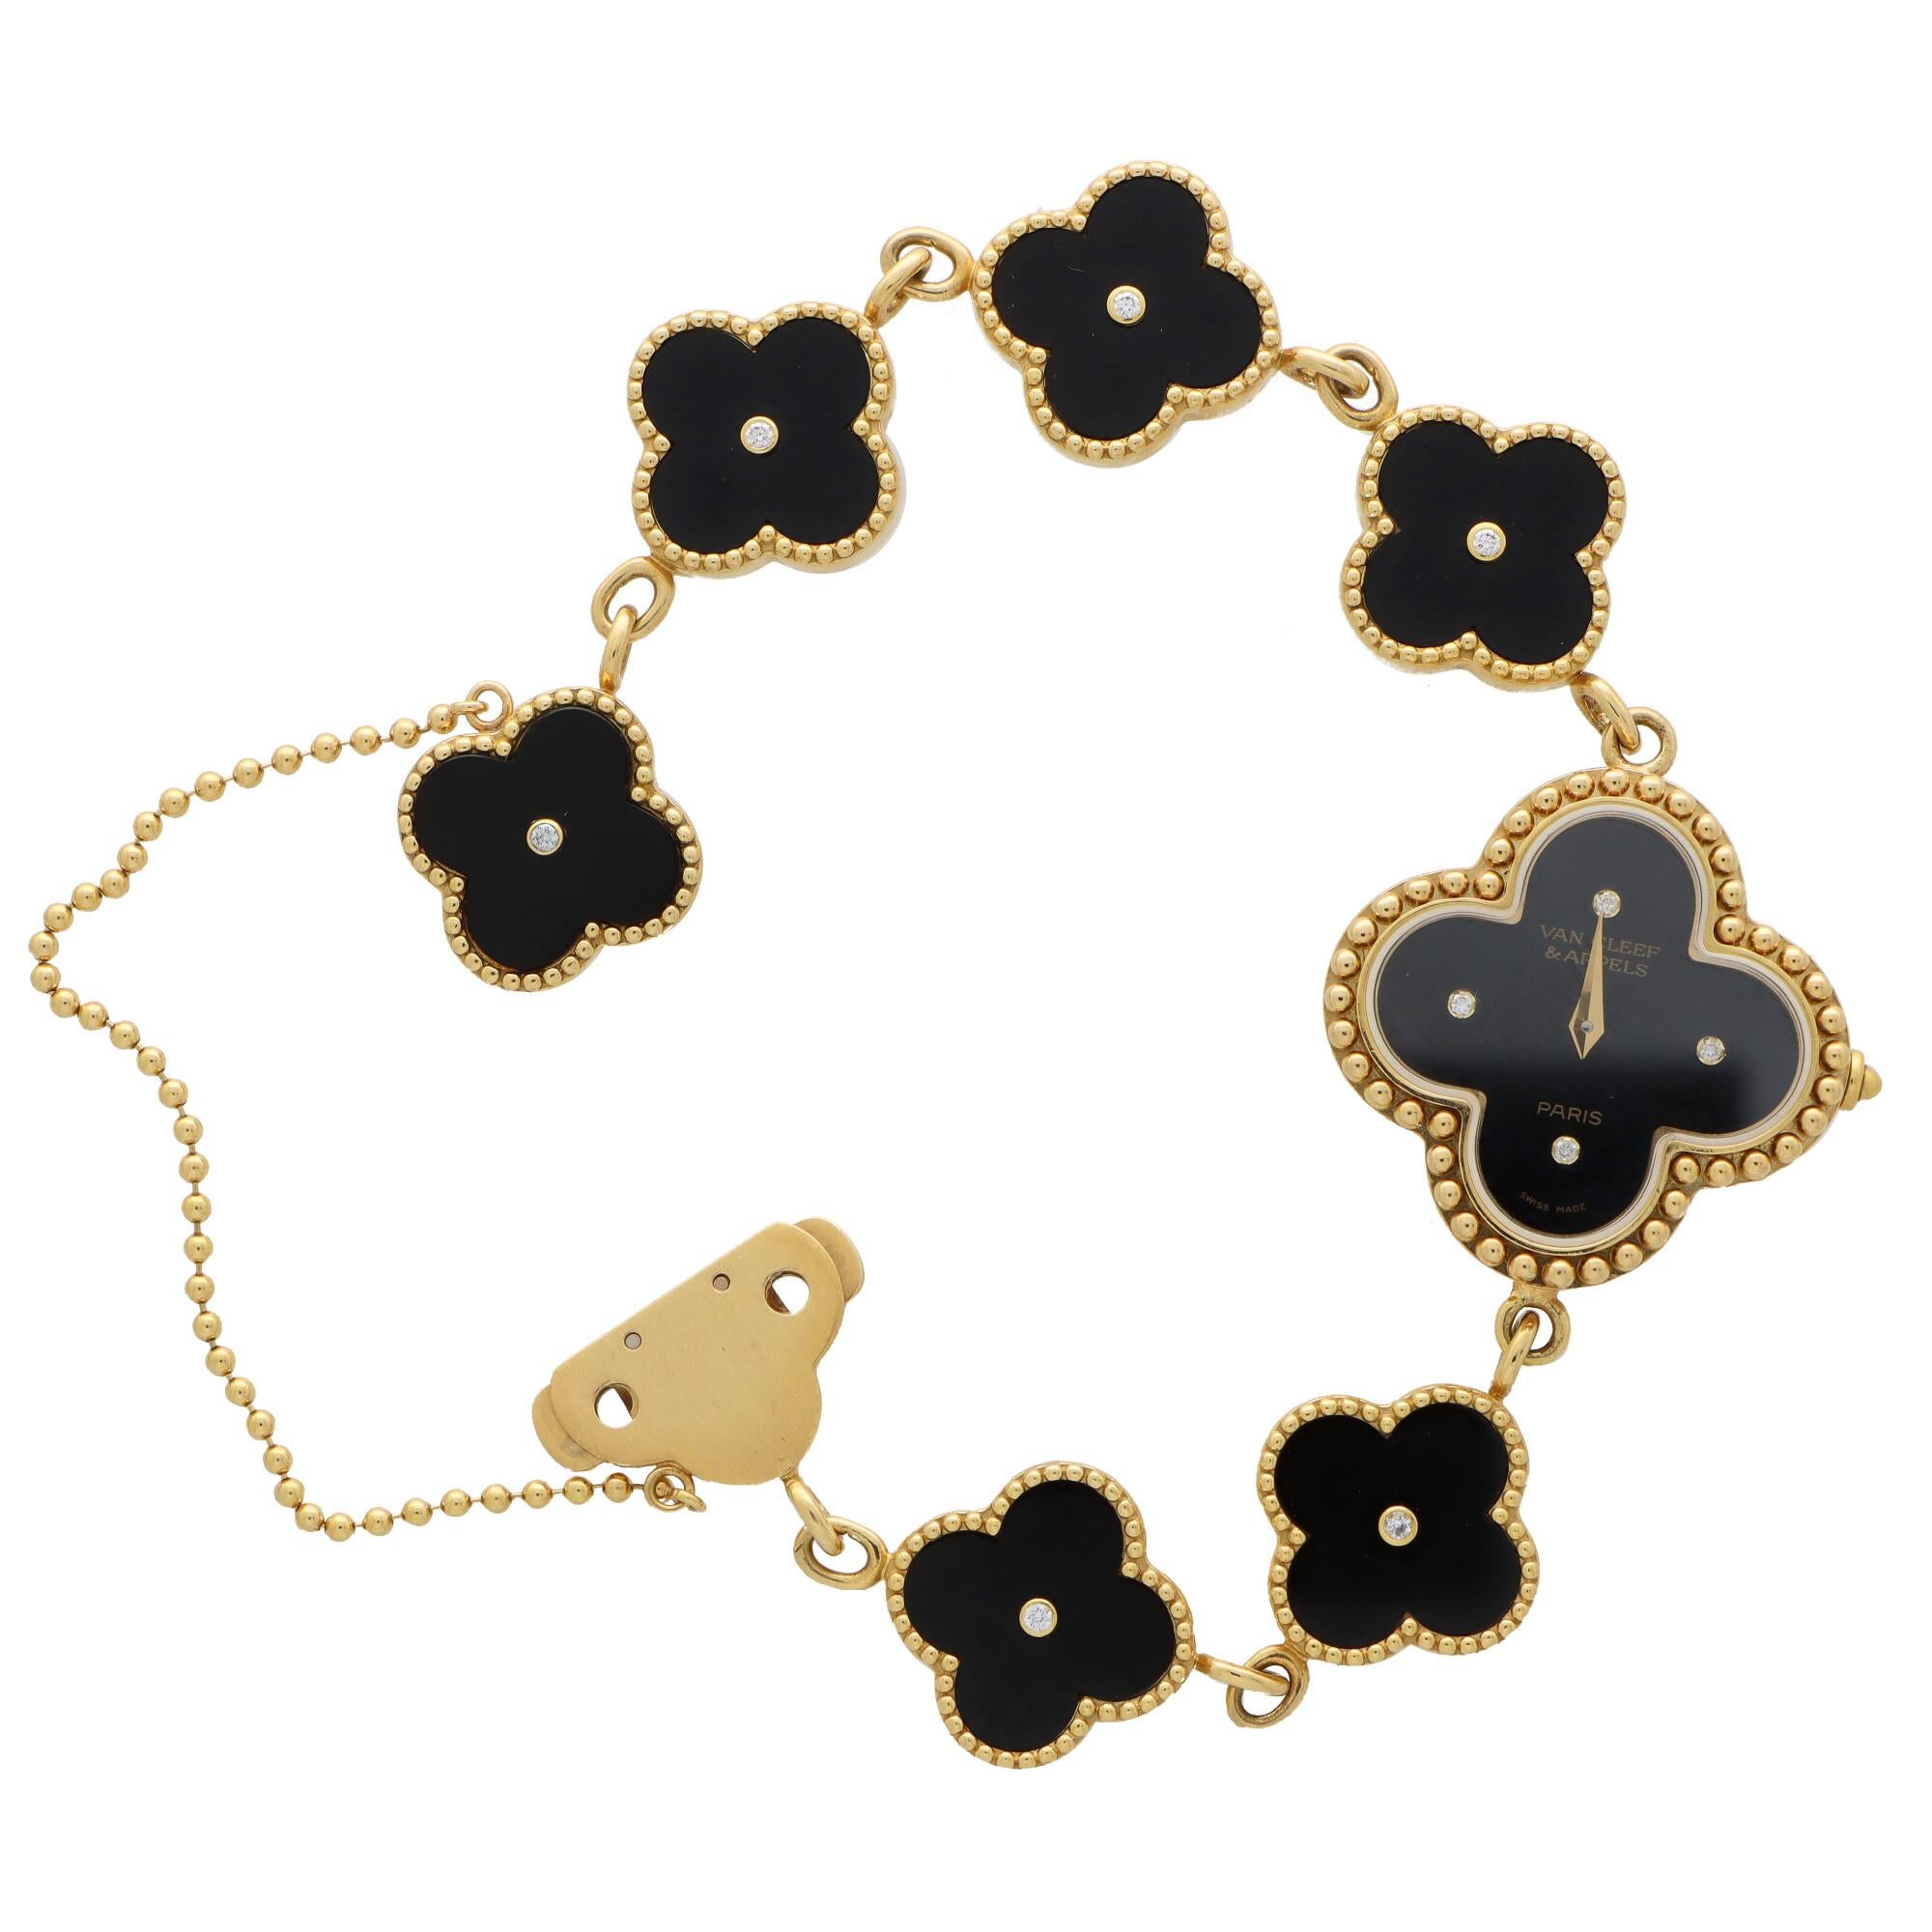 A beautiful vintage Van Cleef & Arpels ‘Alhambra’ onyx and diamond wristwatch bracelet set in 18k yellow gold.

The watch is composed of seven iconic Alhambra clover motifs one of which being slightly larger in size and acts as the face of the